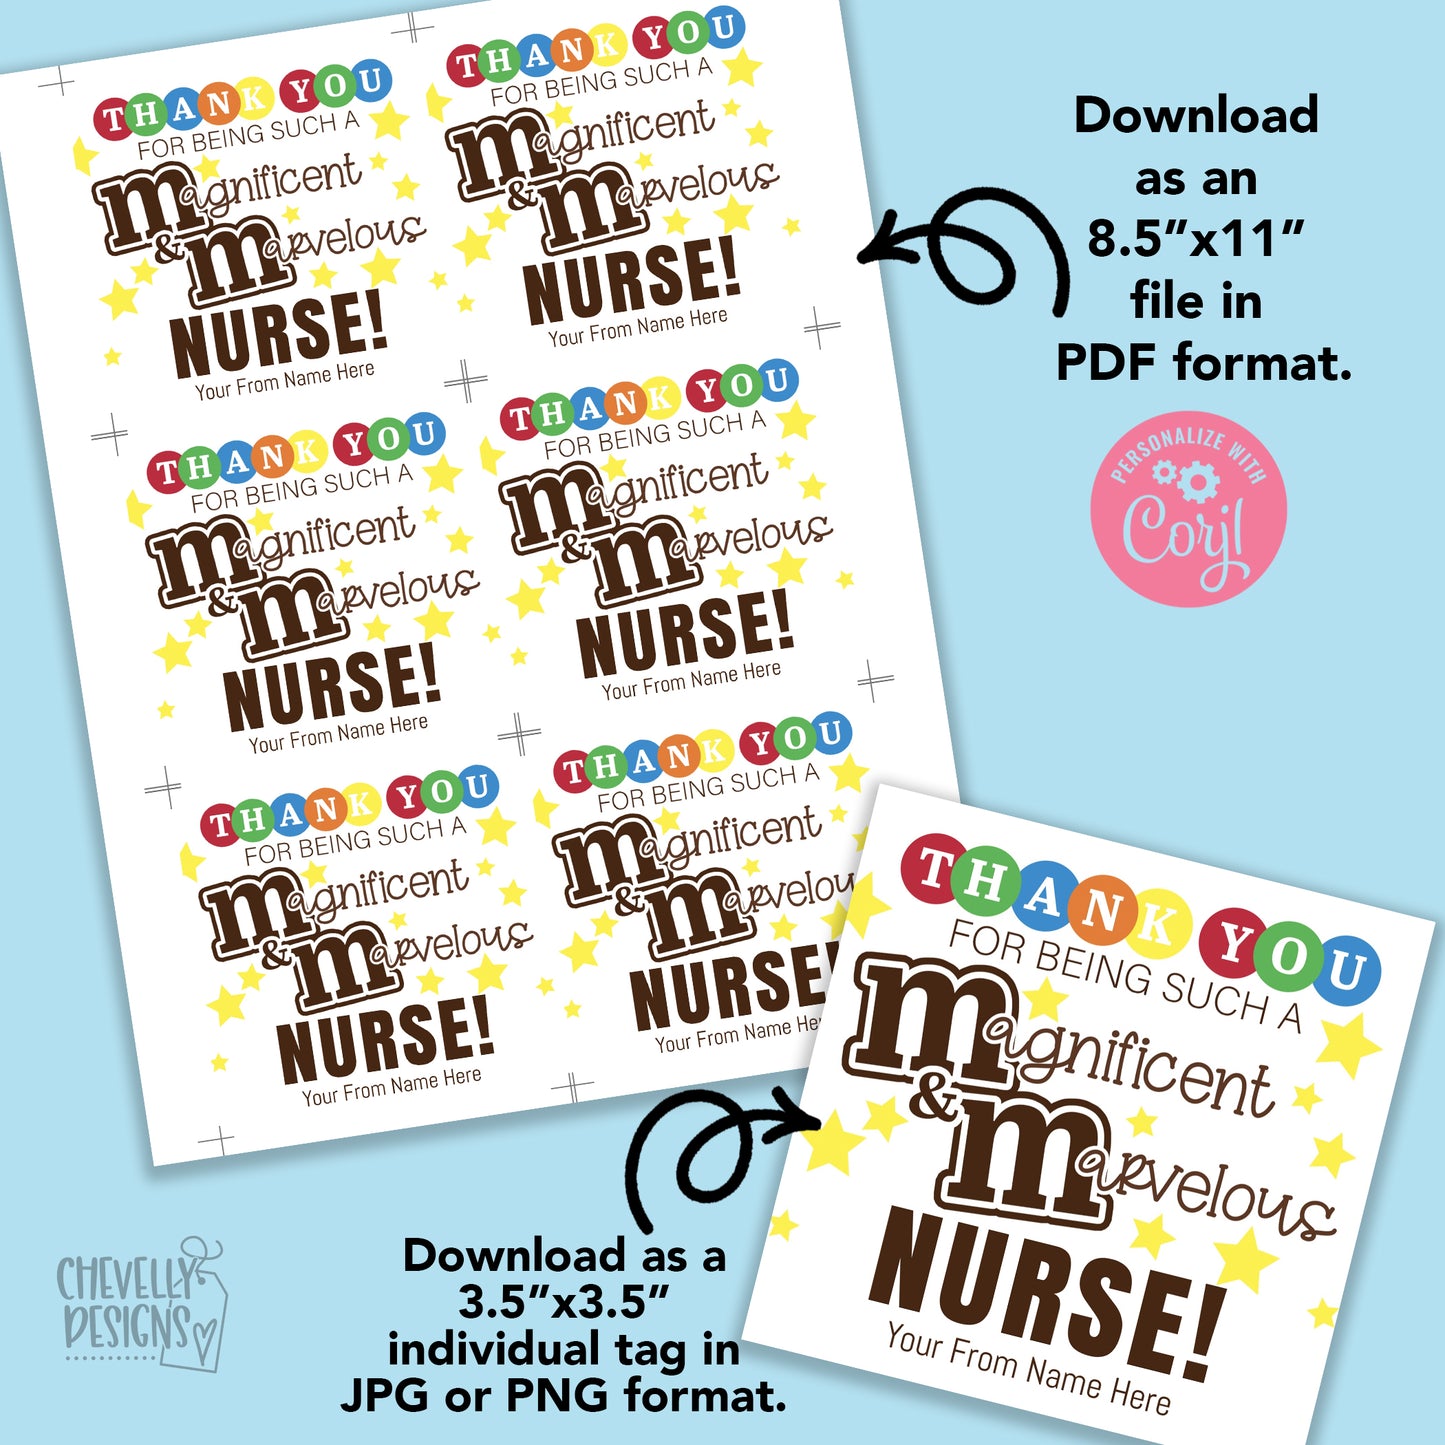 Editable - Thank You Nurse Appreciation - Magnificent and Marvelous Gift Tags for Chocolate Candies - Printable Digital File